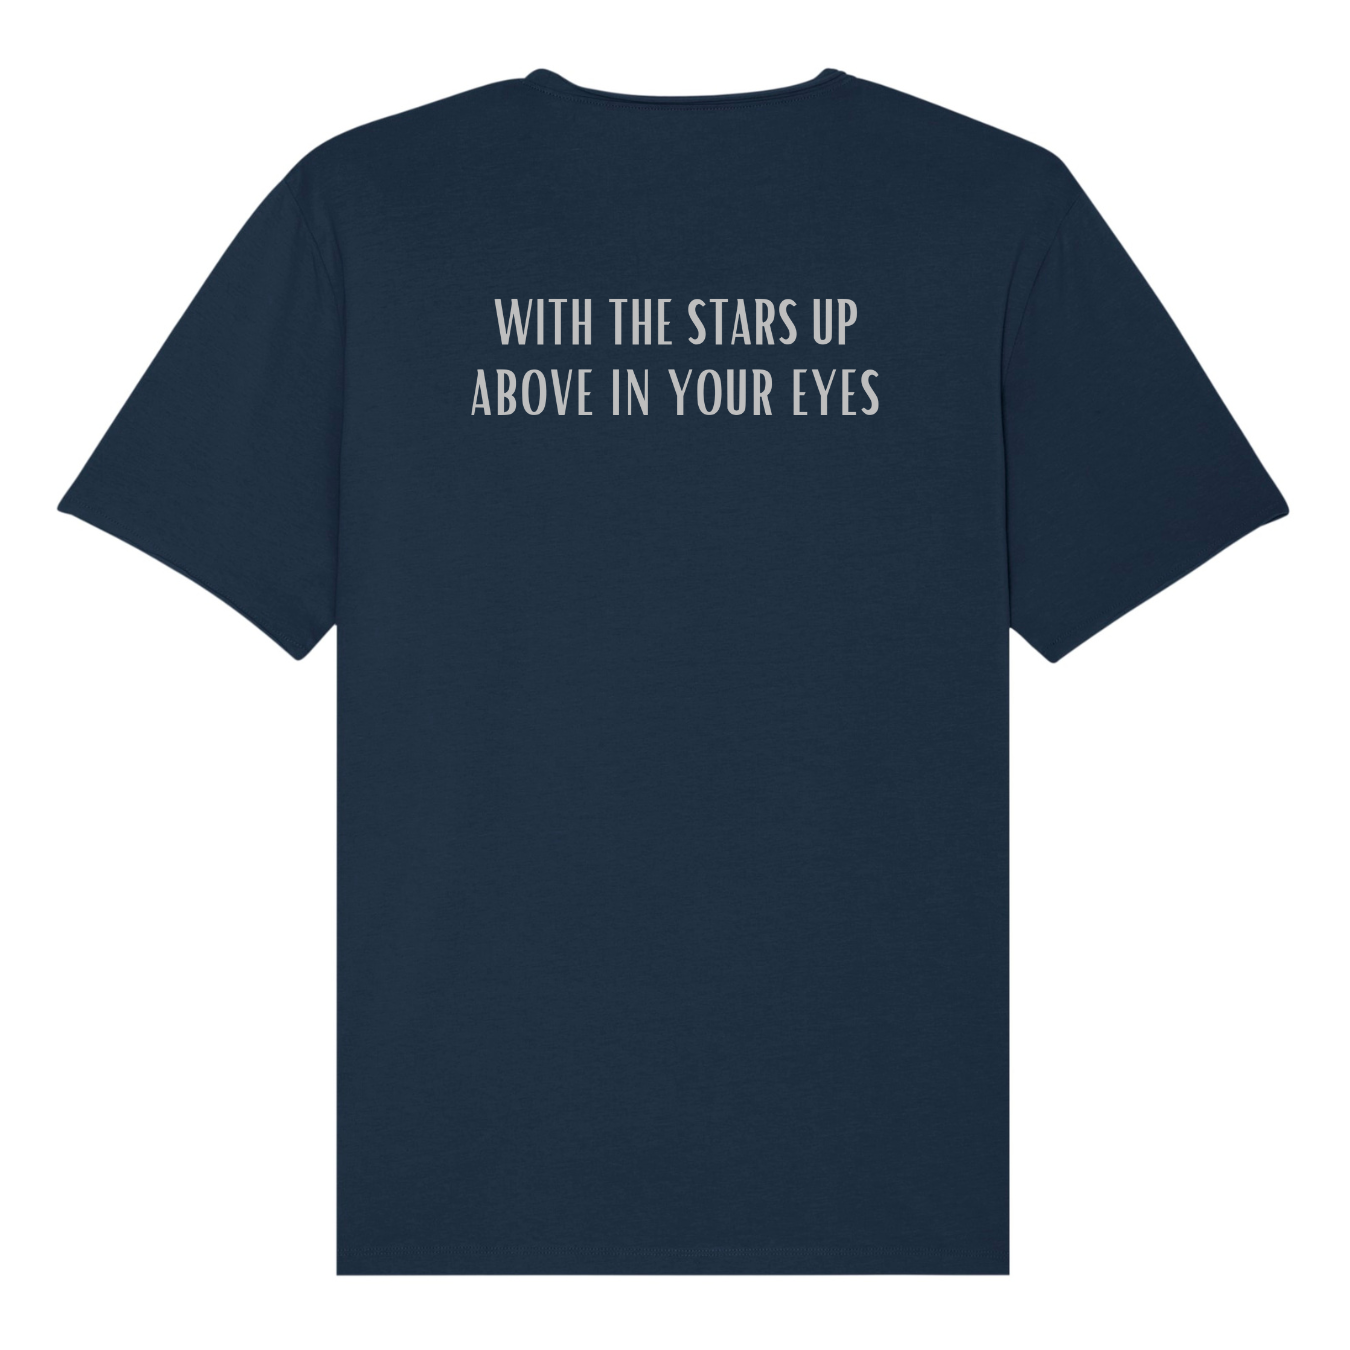 The back of a navy blue t-shirt, with the text 'With the stars up above in your eyes' printed in metallic silver across the back.